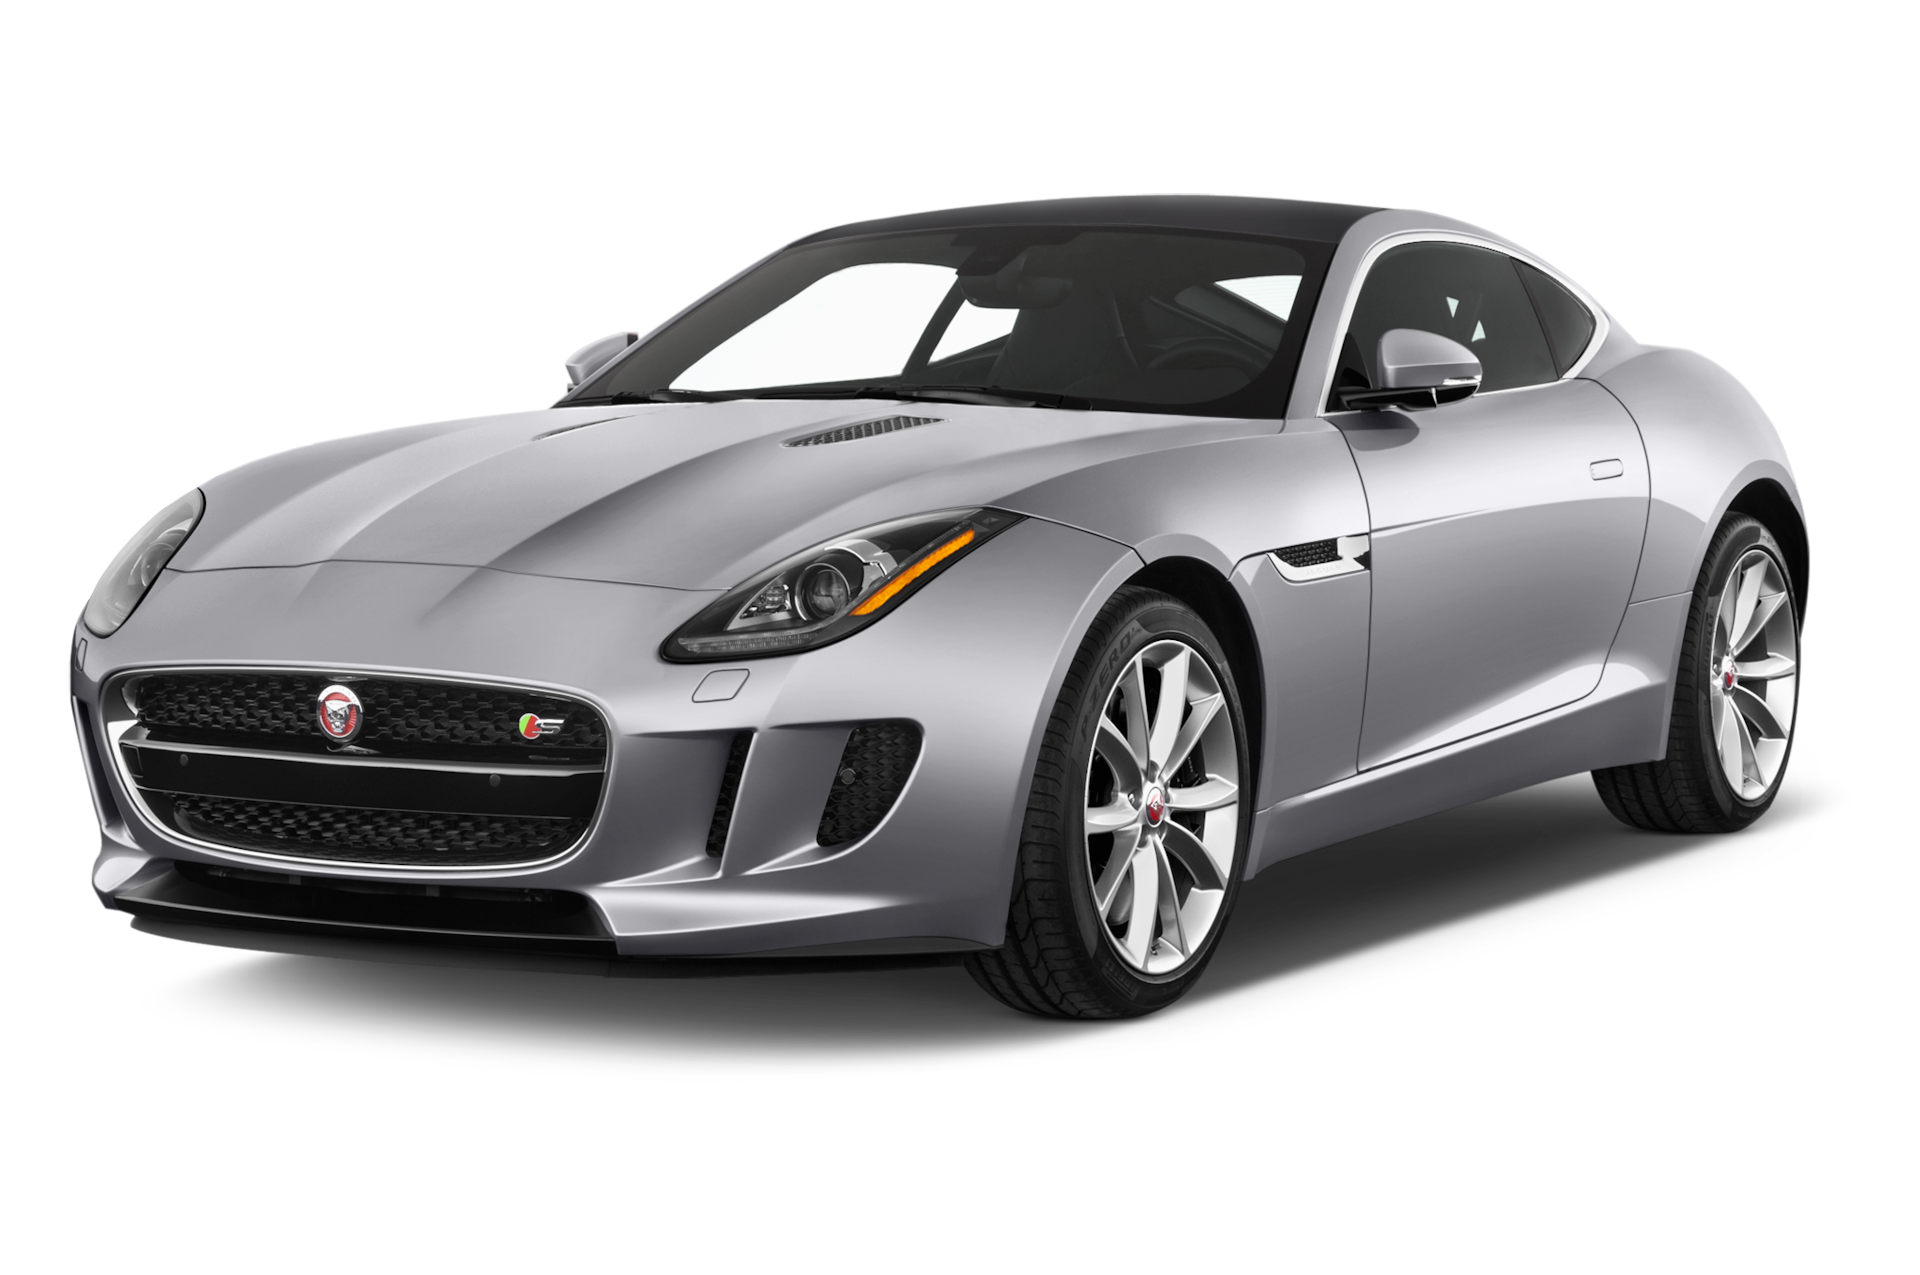 2017 Jaguar F-Type Prices, Reviews, and Photos - MotorTrend